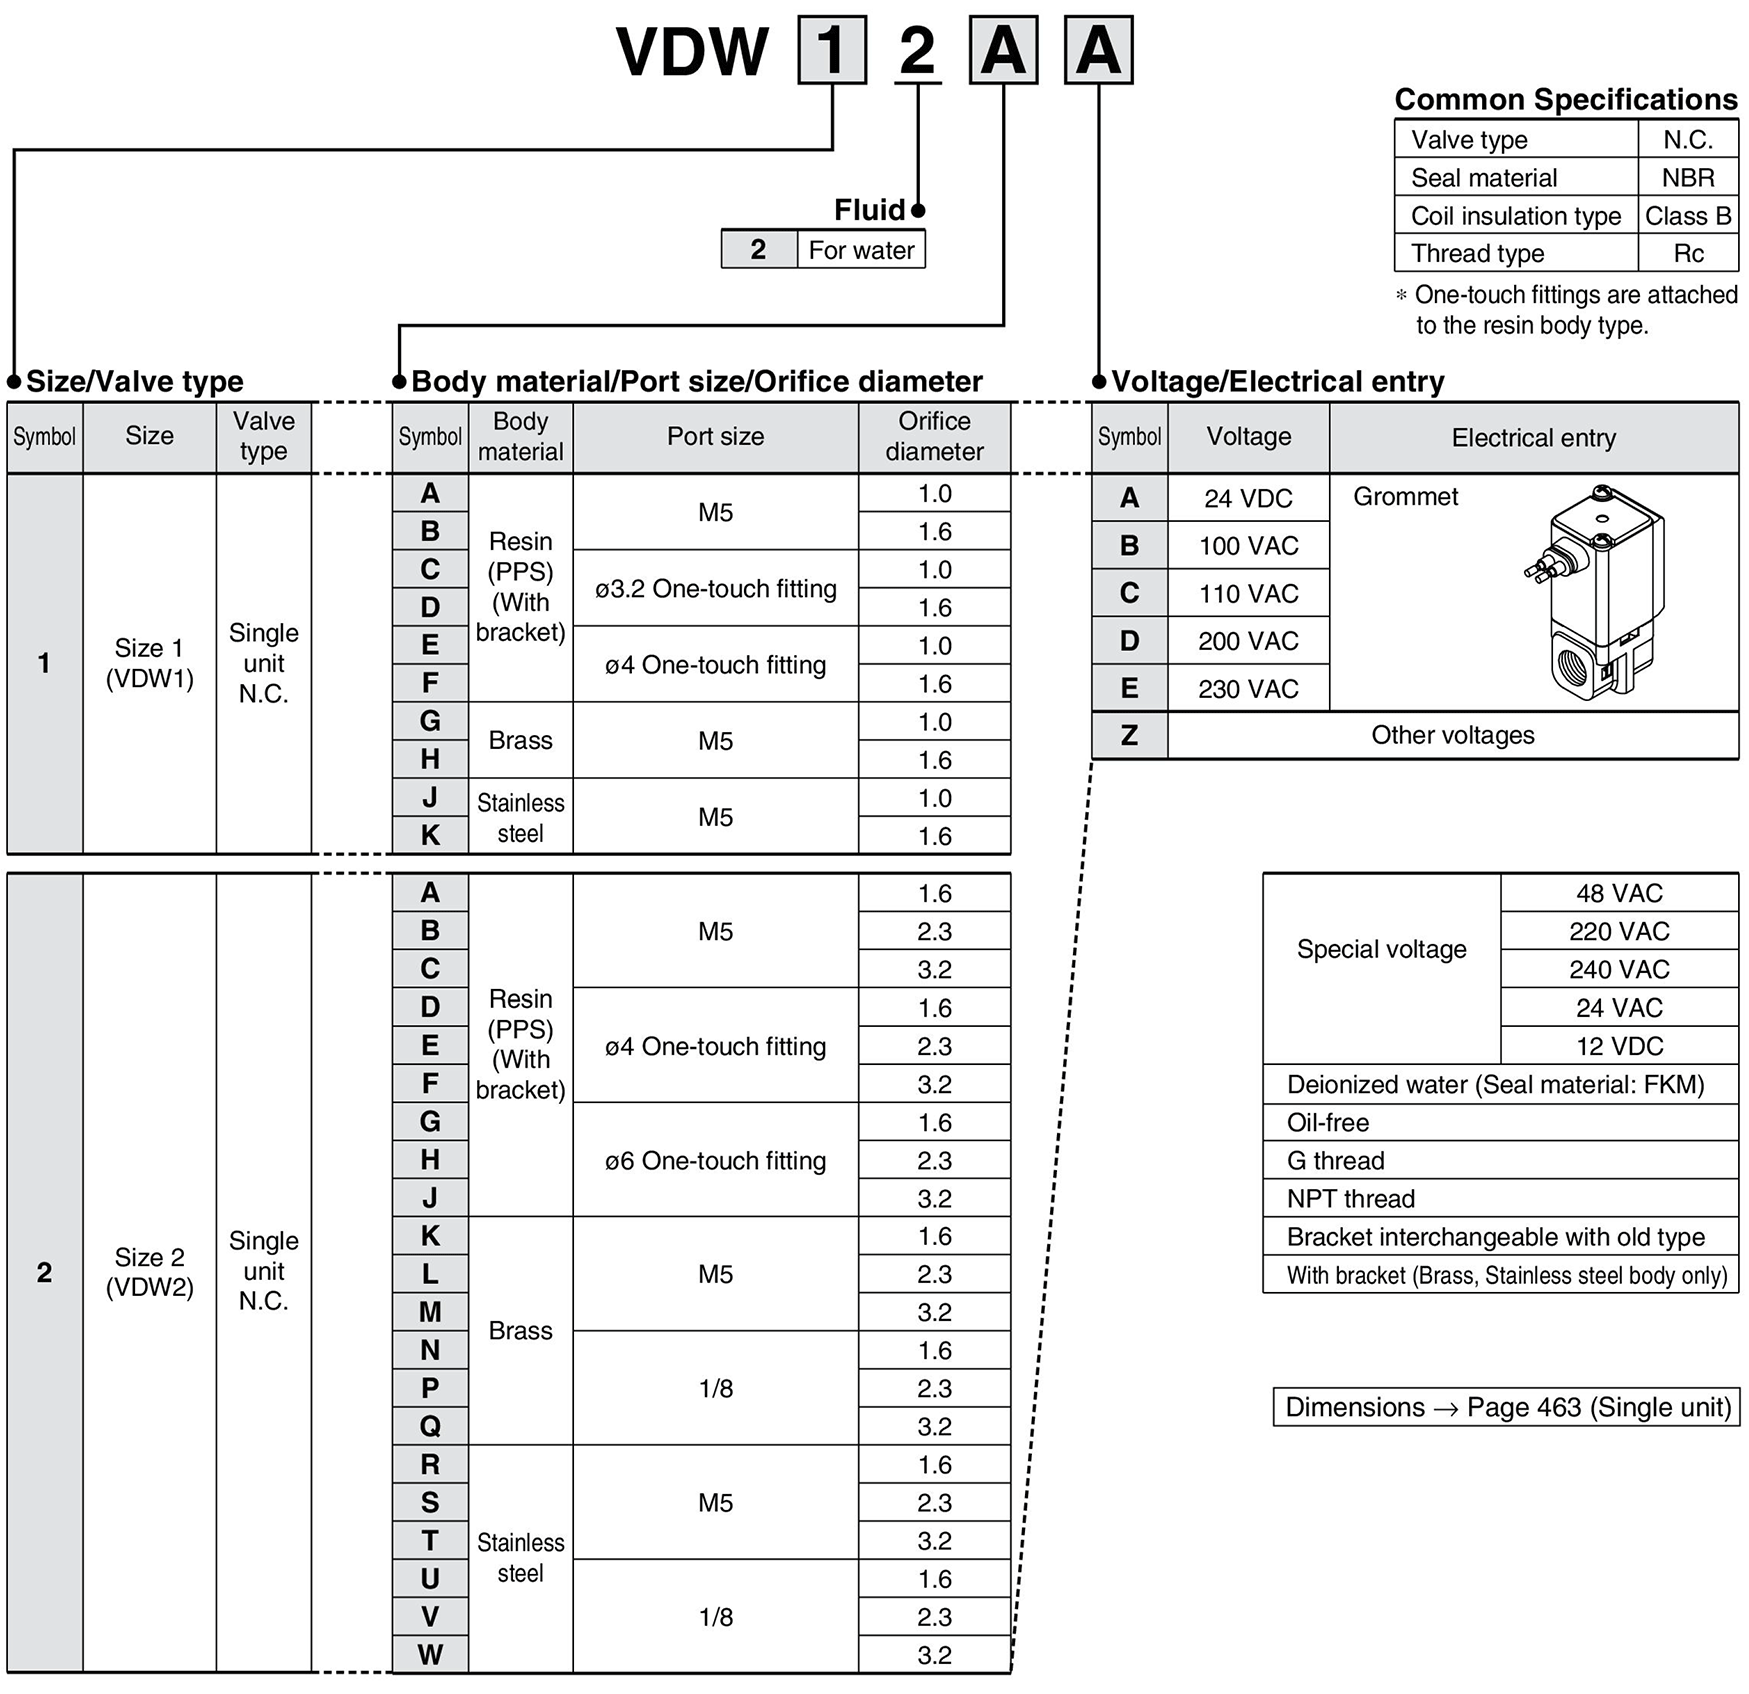 Model number example (for water)